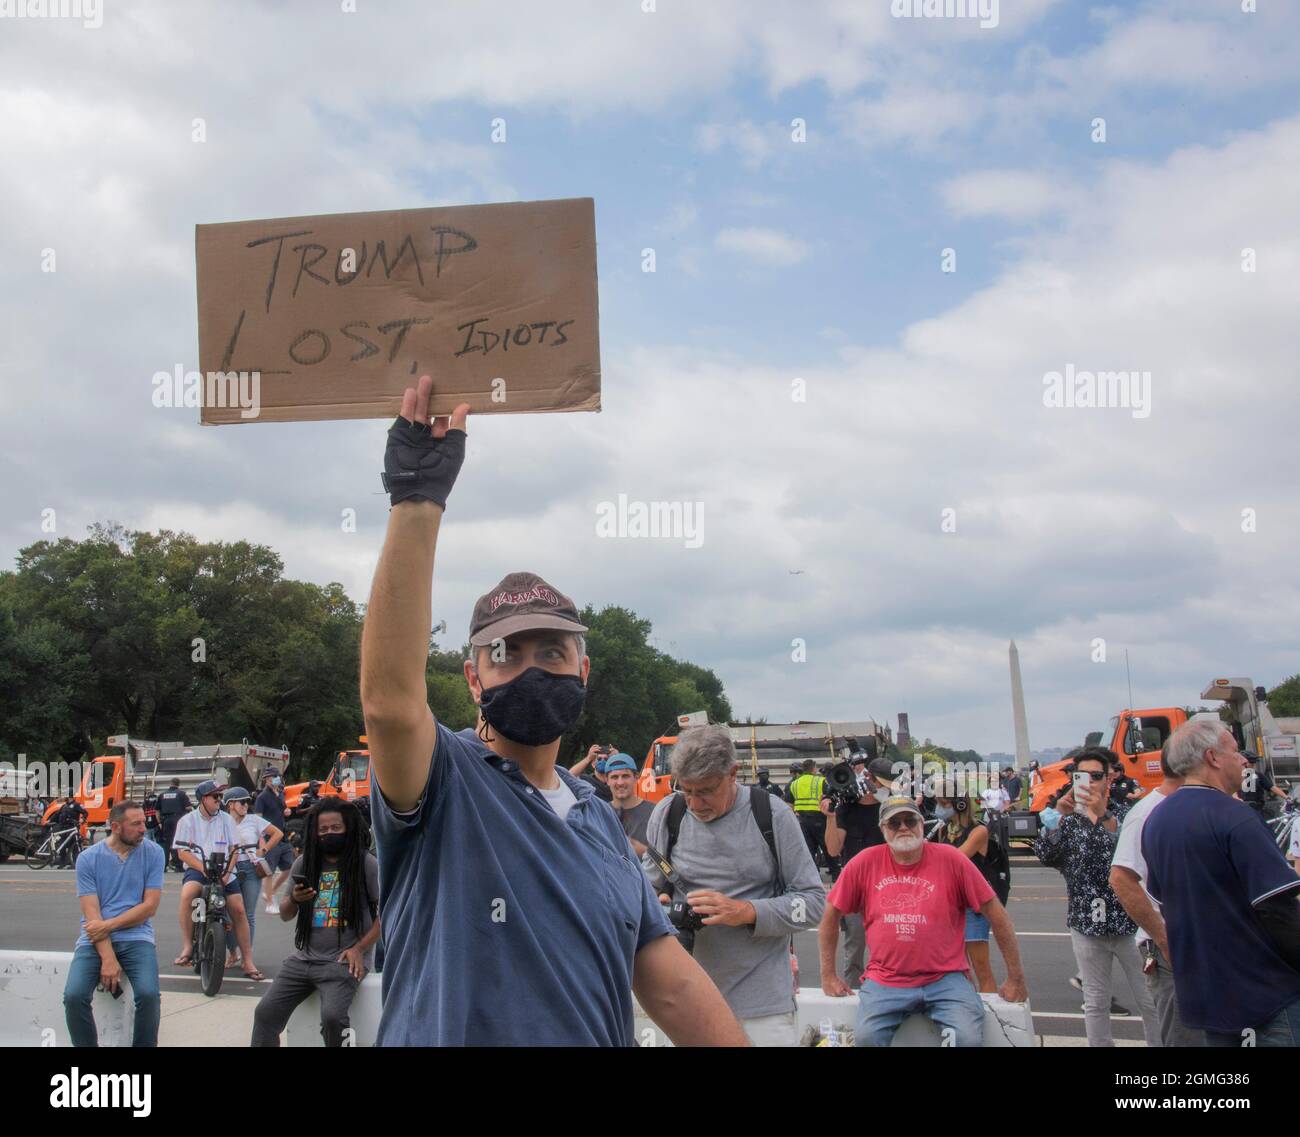 Washington DC, September 18, 2021, USA: An unidentified man holds up a sign in protest of the Justice for J6 rally in Washington DC.  The Justice for Stock Photo